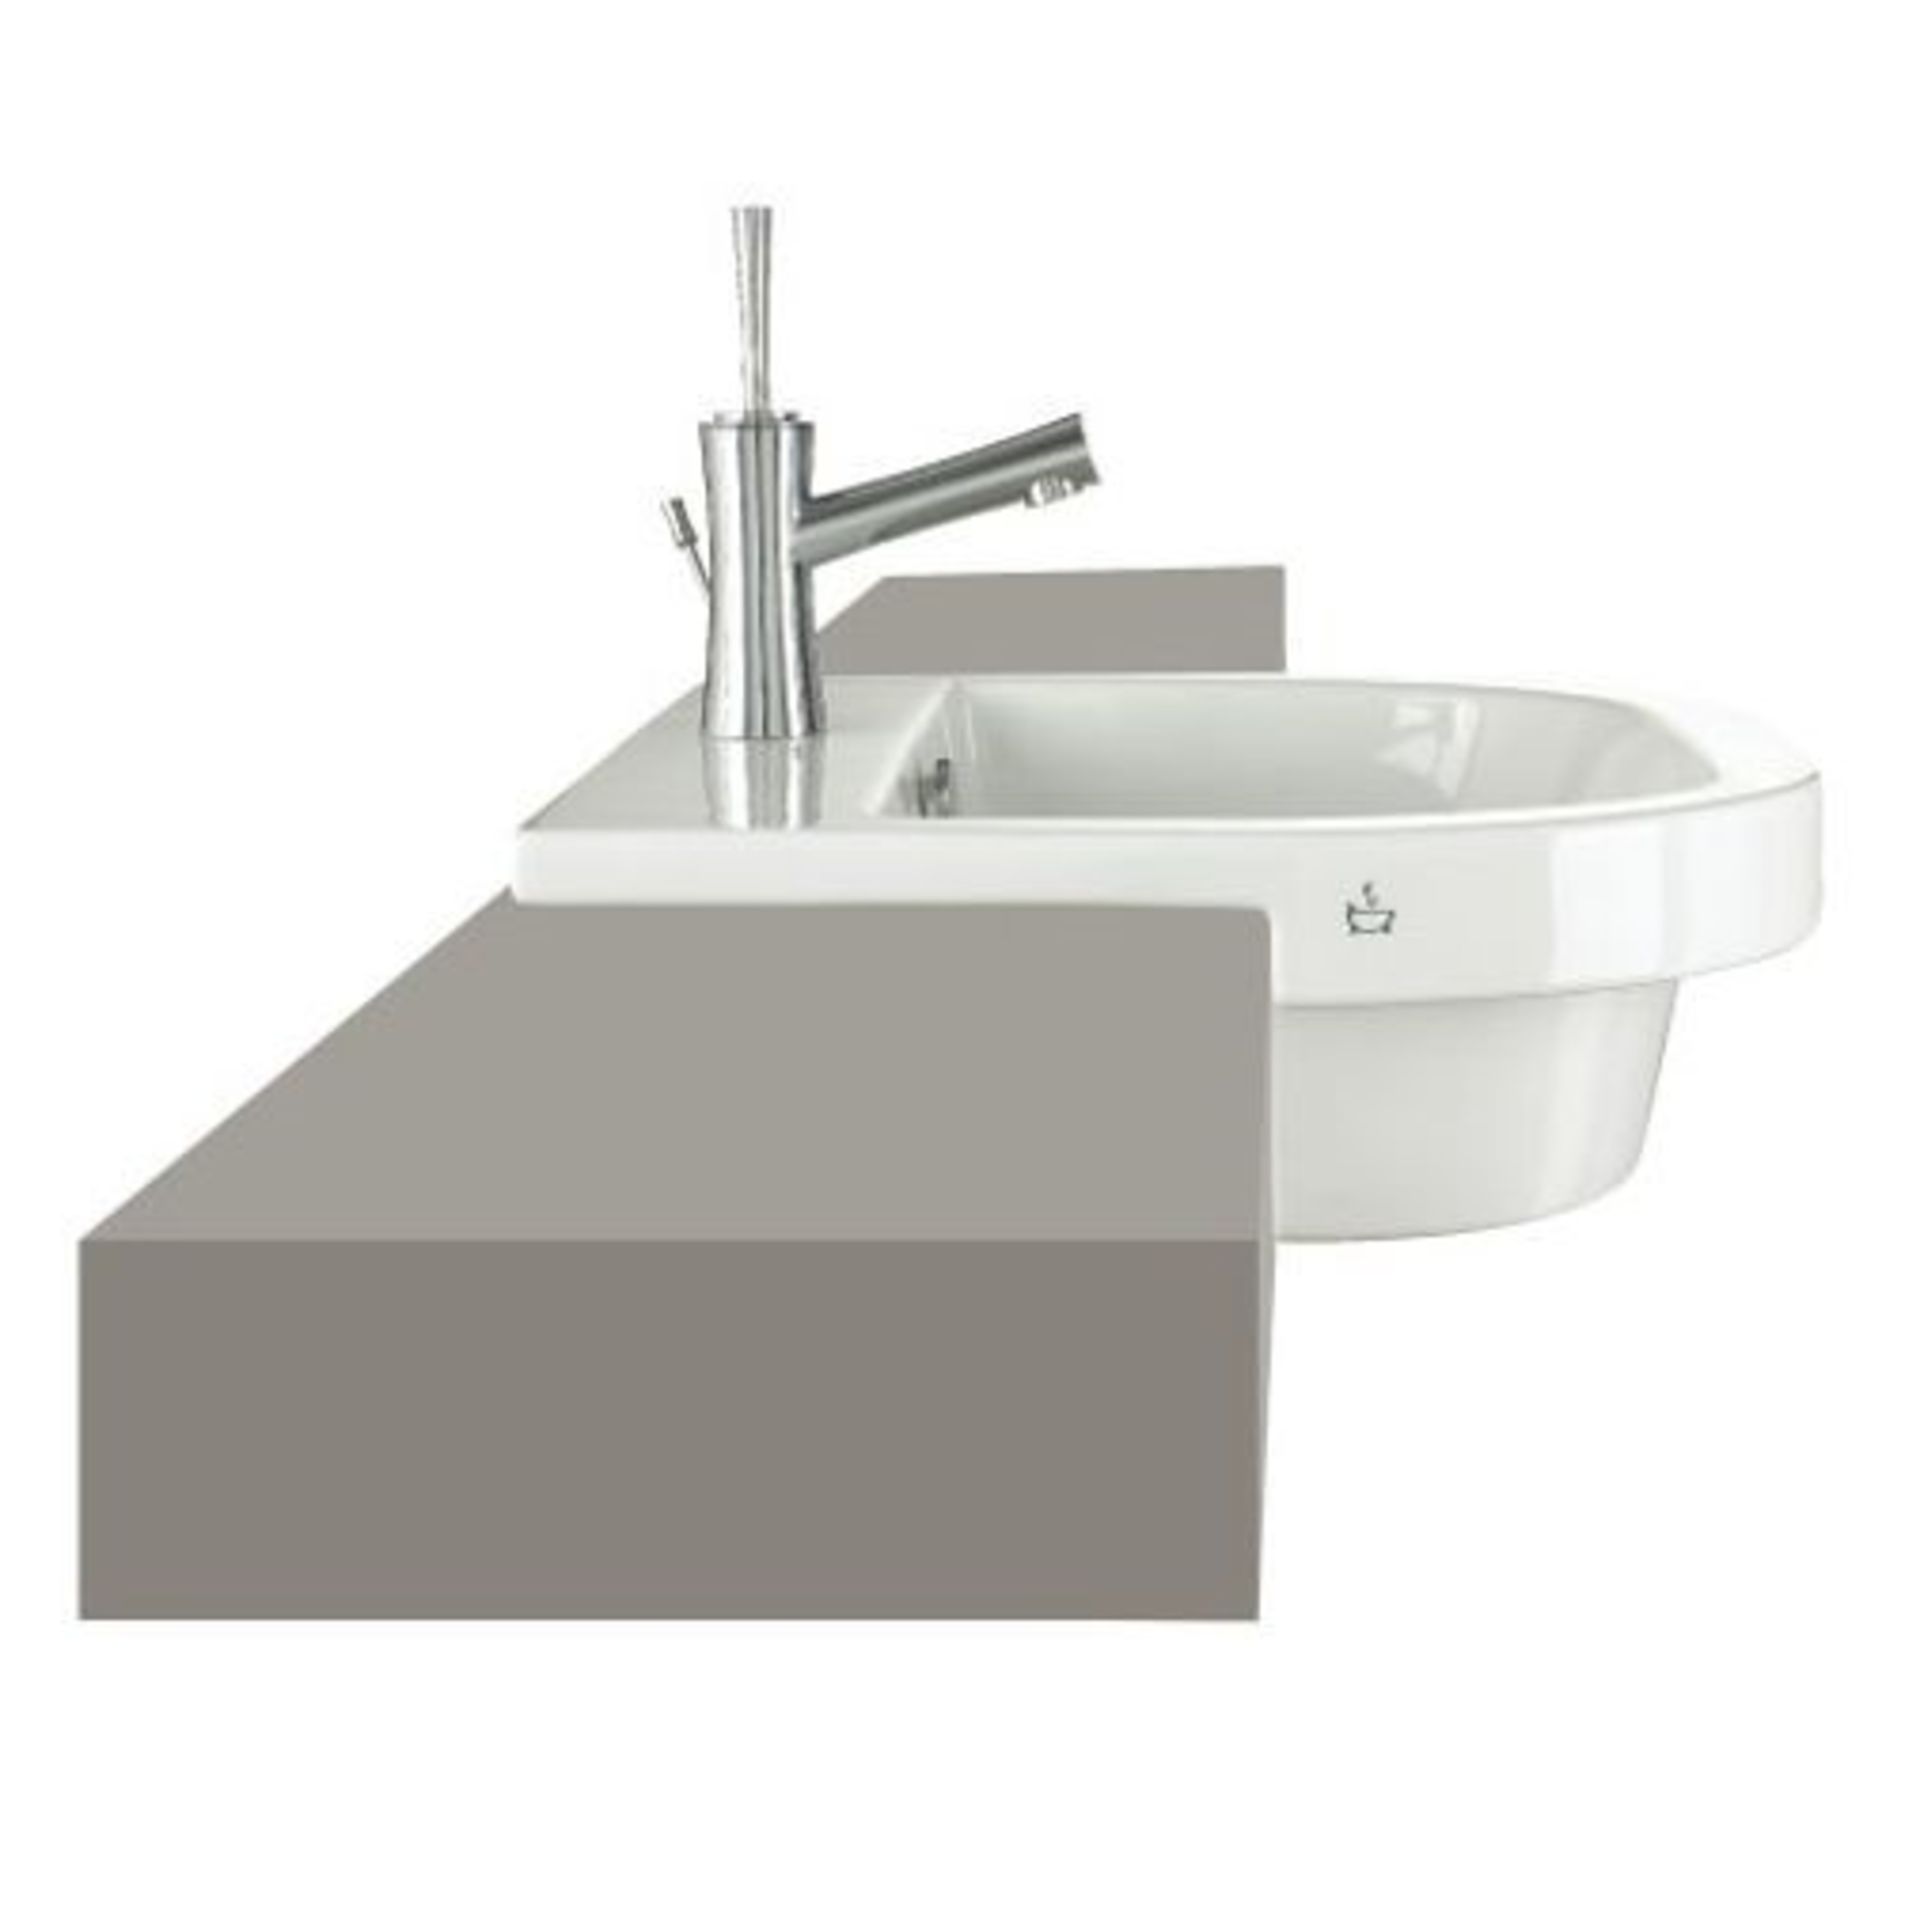 BATHSTORE 560 X 470MM EURO MONO SEMI RECESSED BASIN WITH FITTING TEMPLATE RRP £275 - Image 2 of 2